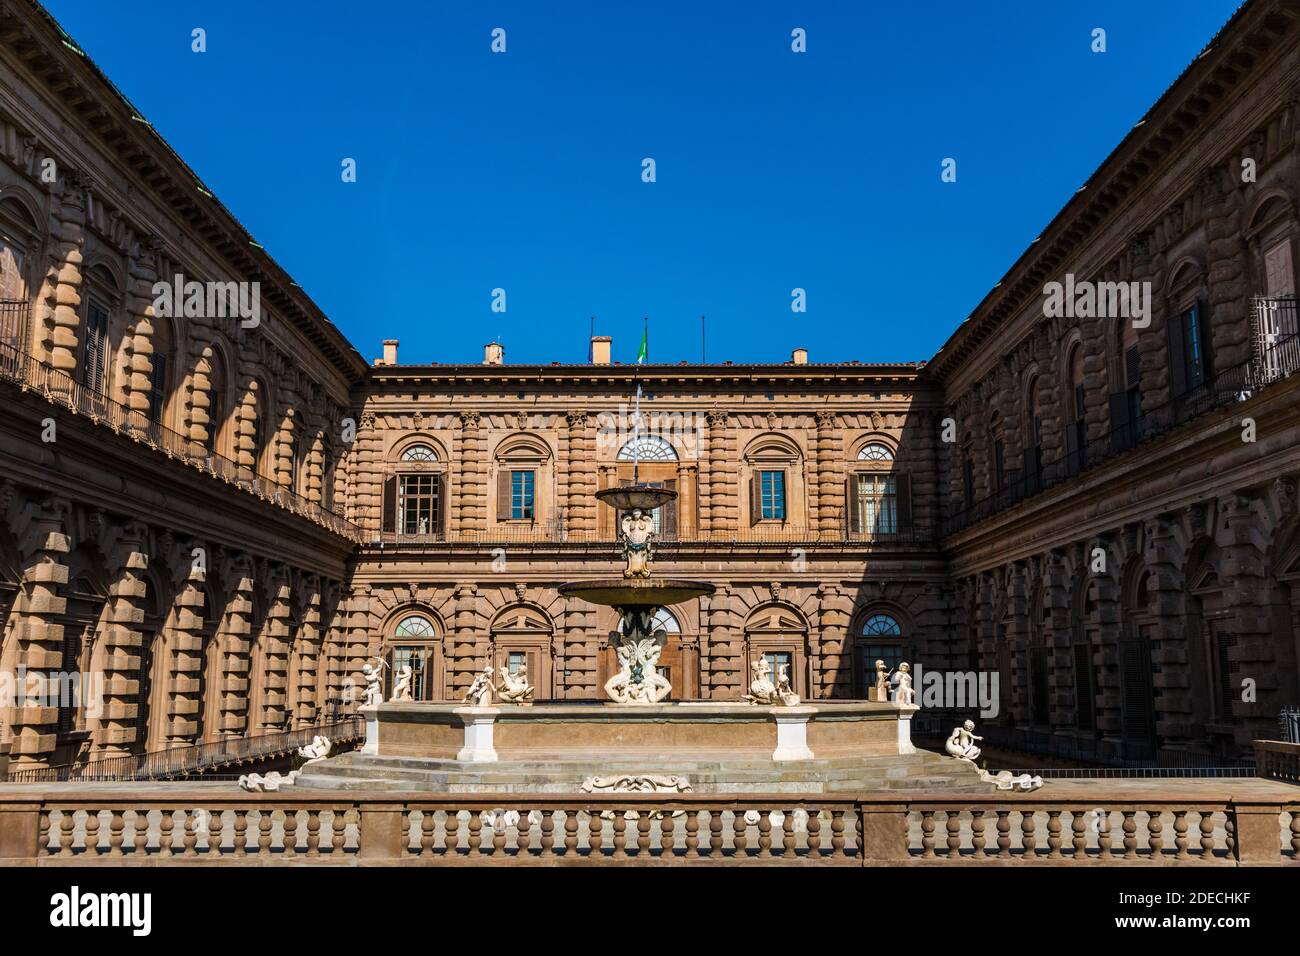 Beautiful view of the courtyard on the terrace of the main floor of the Palazzo Pitti with the famous Artichoke Fountain in Florence, Italy. It is... Stock Photo